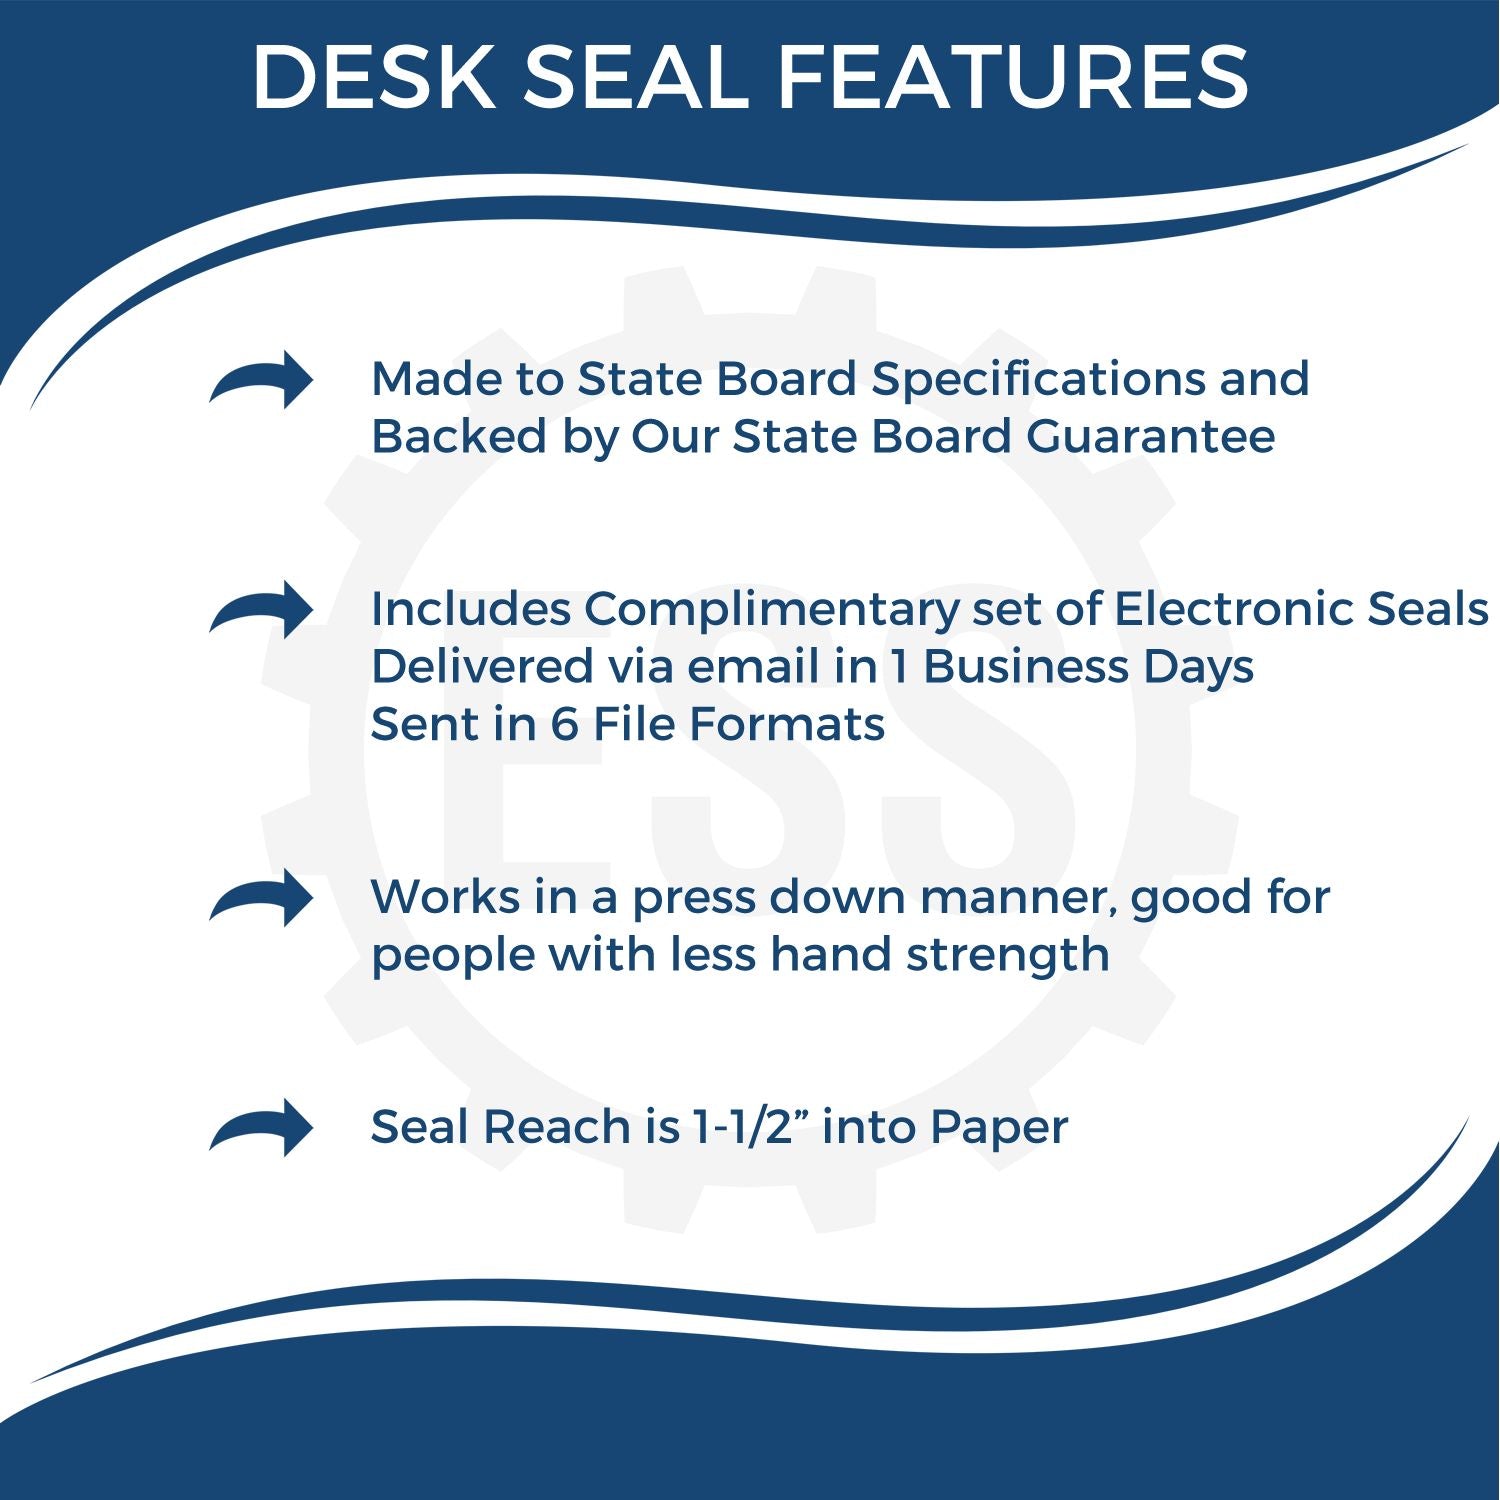 A picture of an infographic highlighting the selling points for the Arkansas Desk Architect Embossing Seal